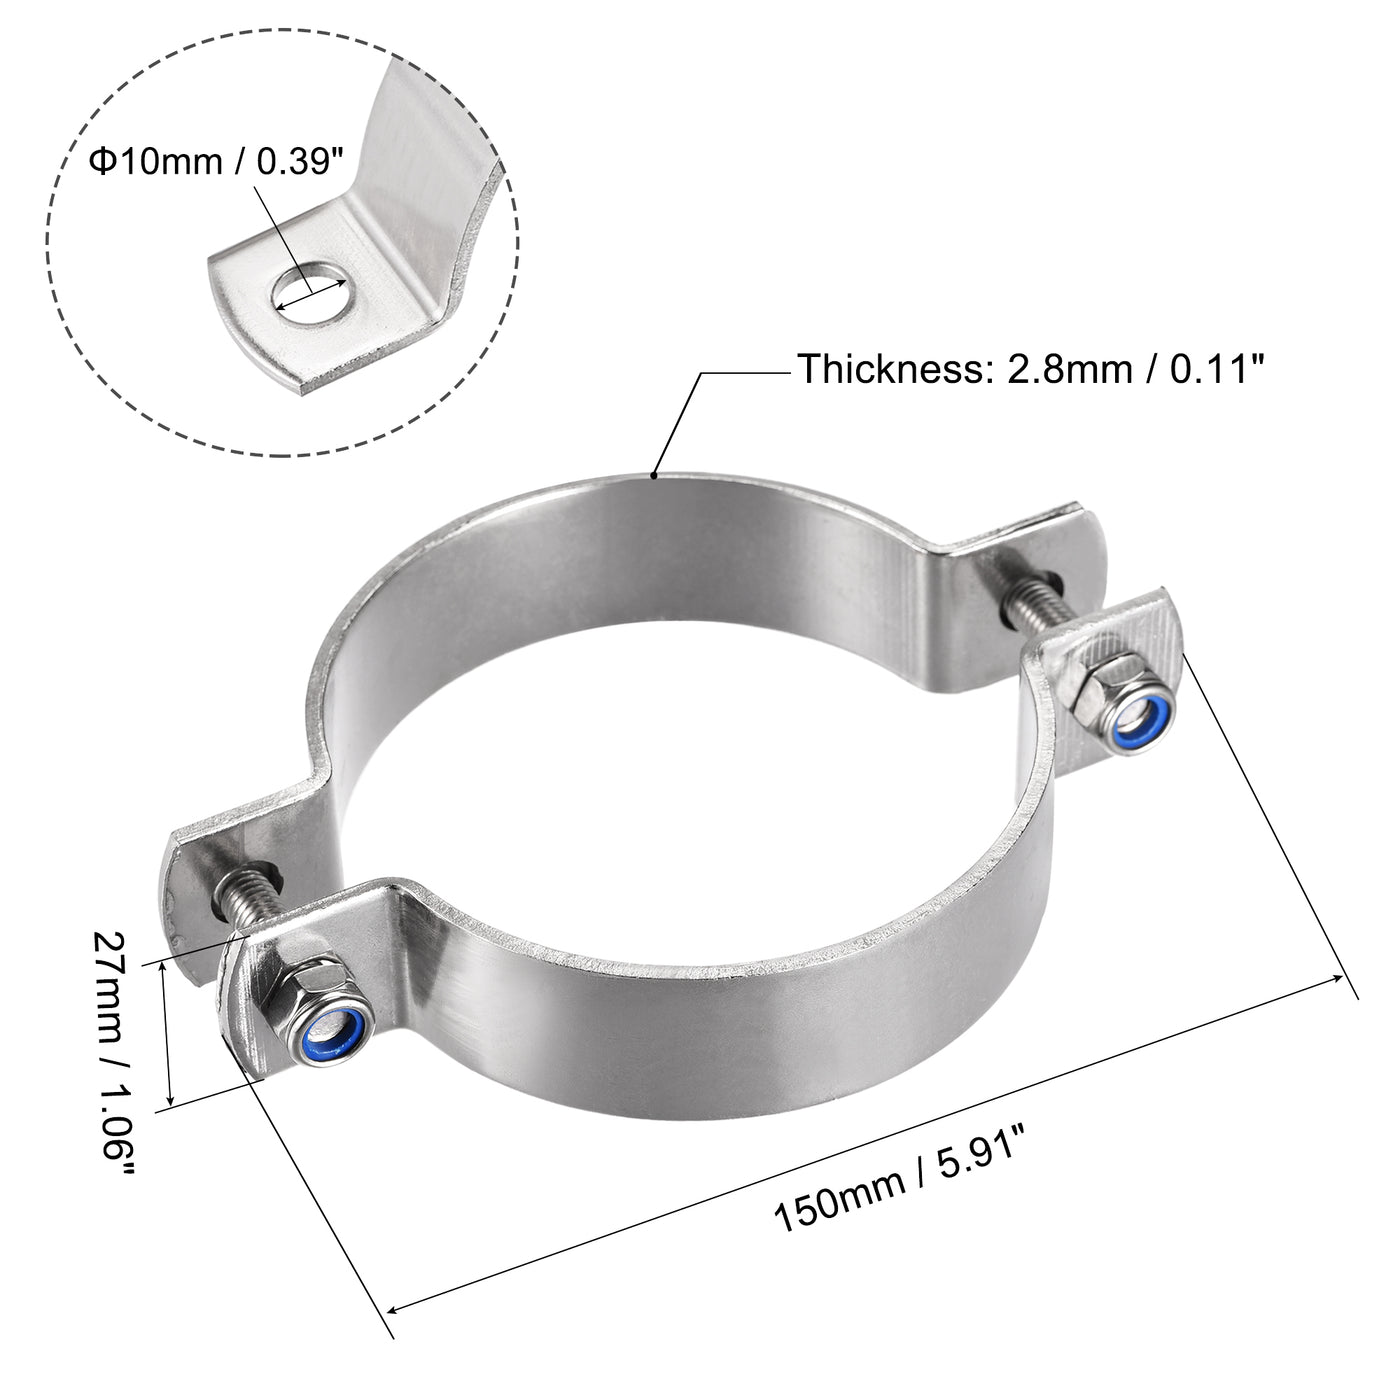 uxcell Uxcell Wall Mount Ceiling Mount Pipe Support, 304 Stainless Steel Pipe Bracket Clamp